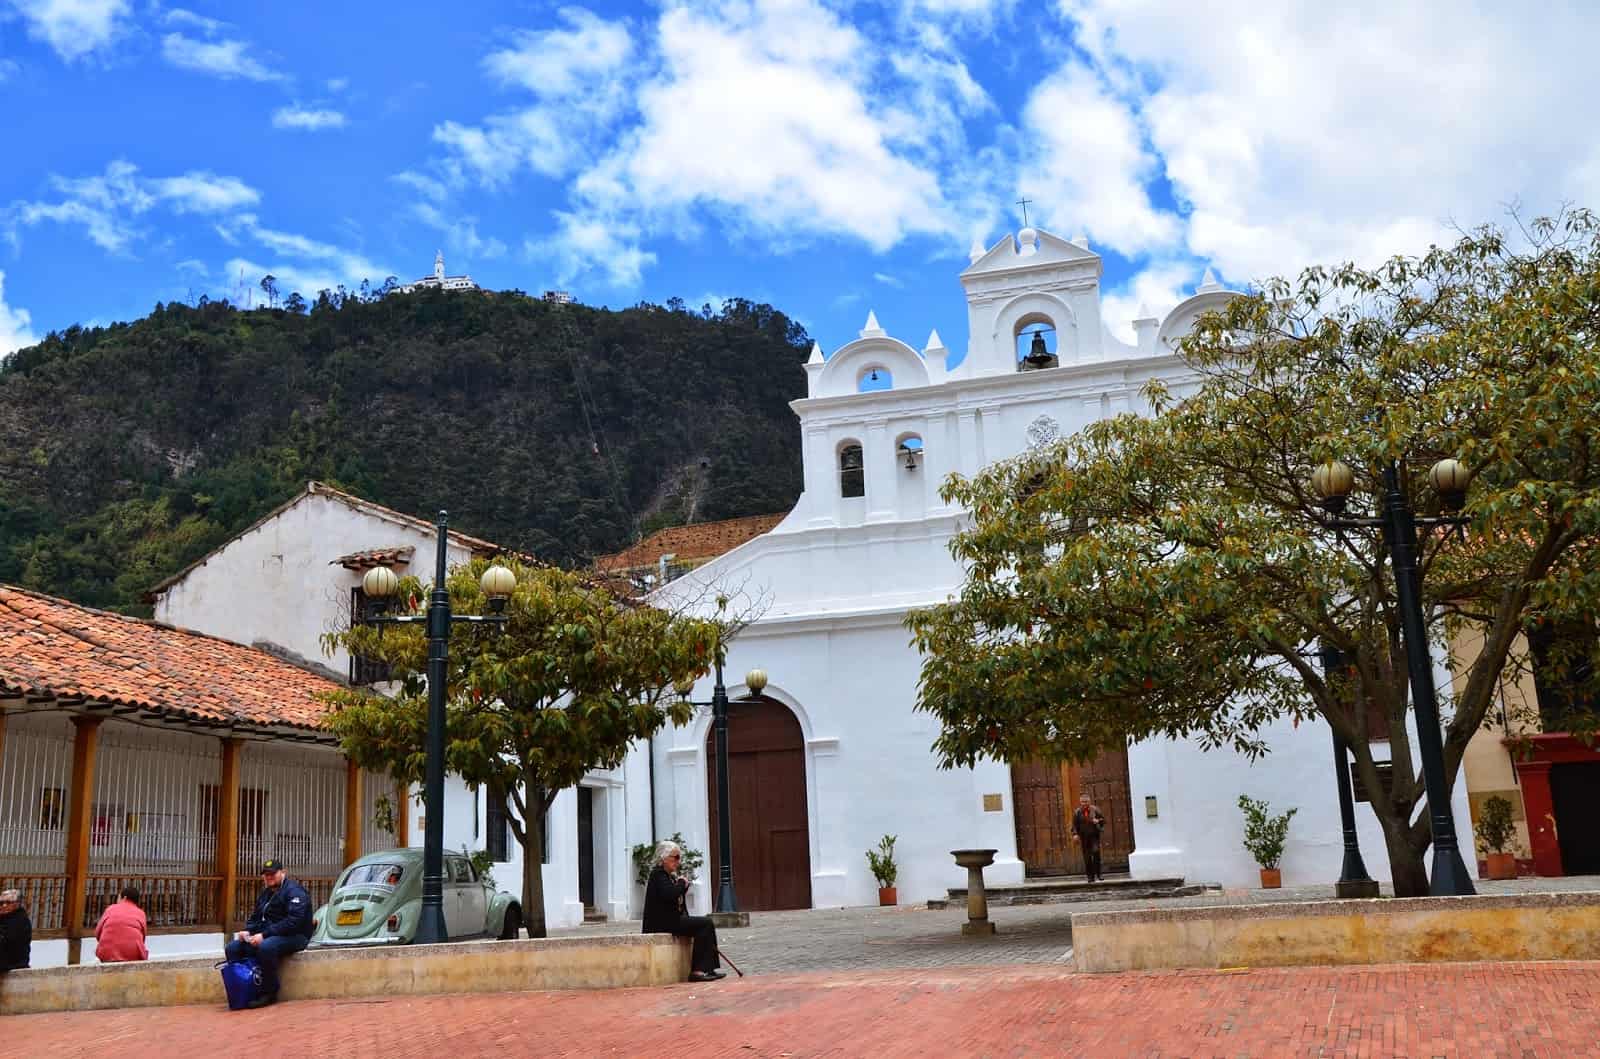 Our Lady of the Waters in Santa Fe de Bogotá, Colombia